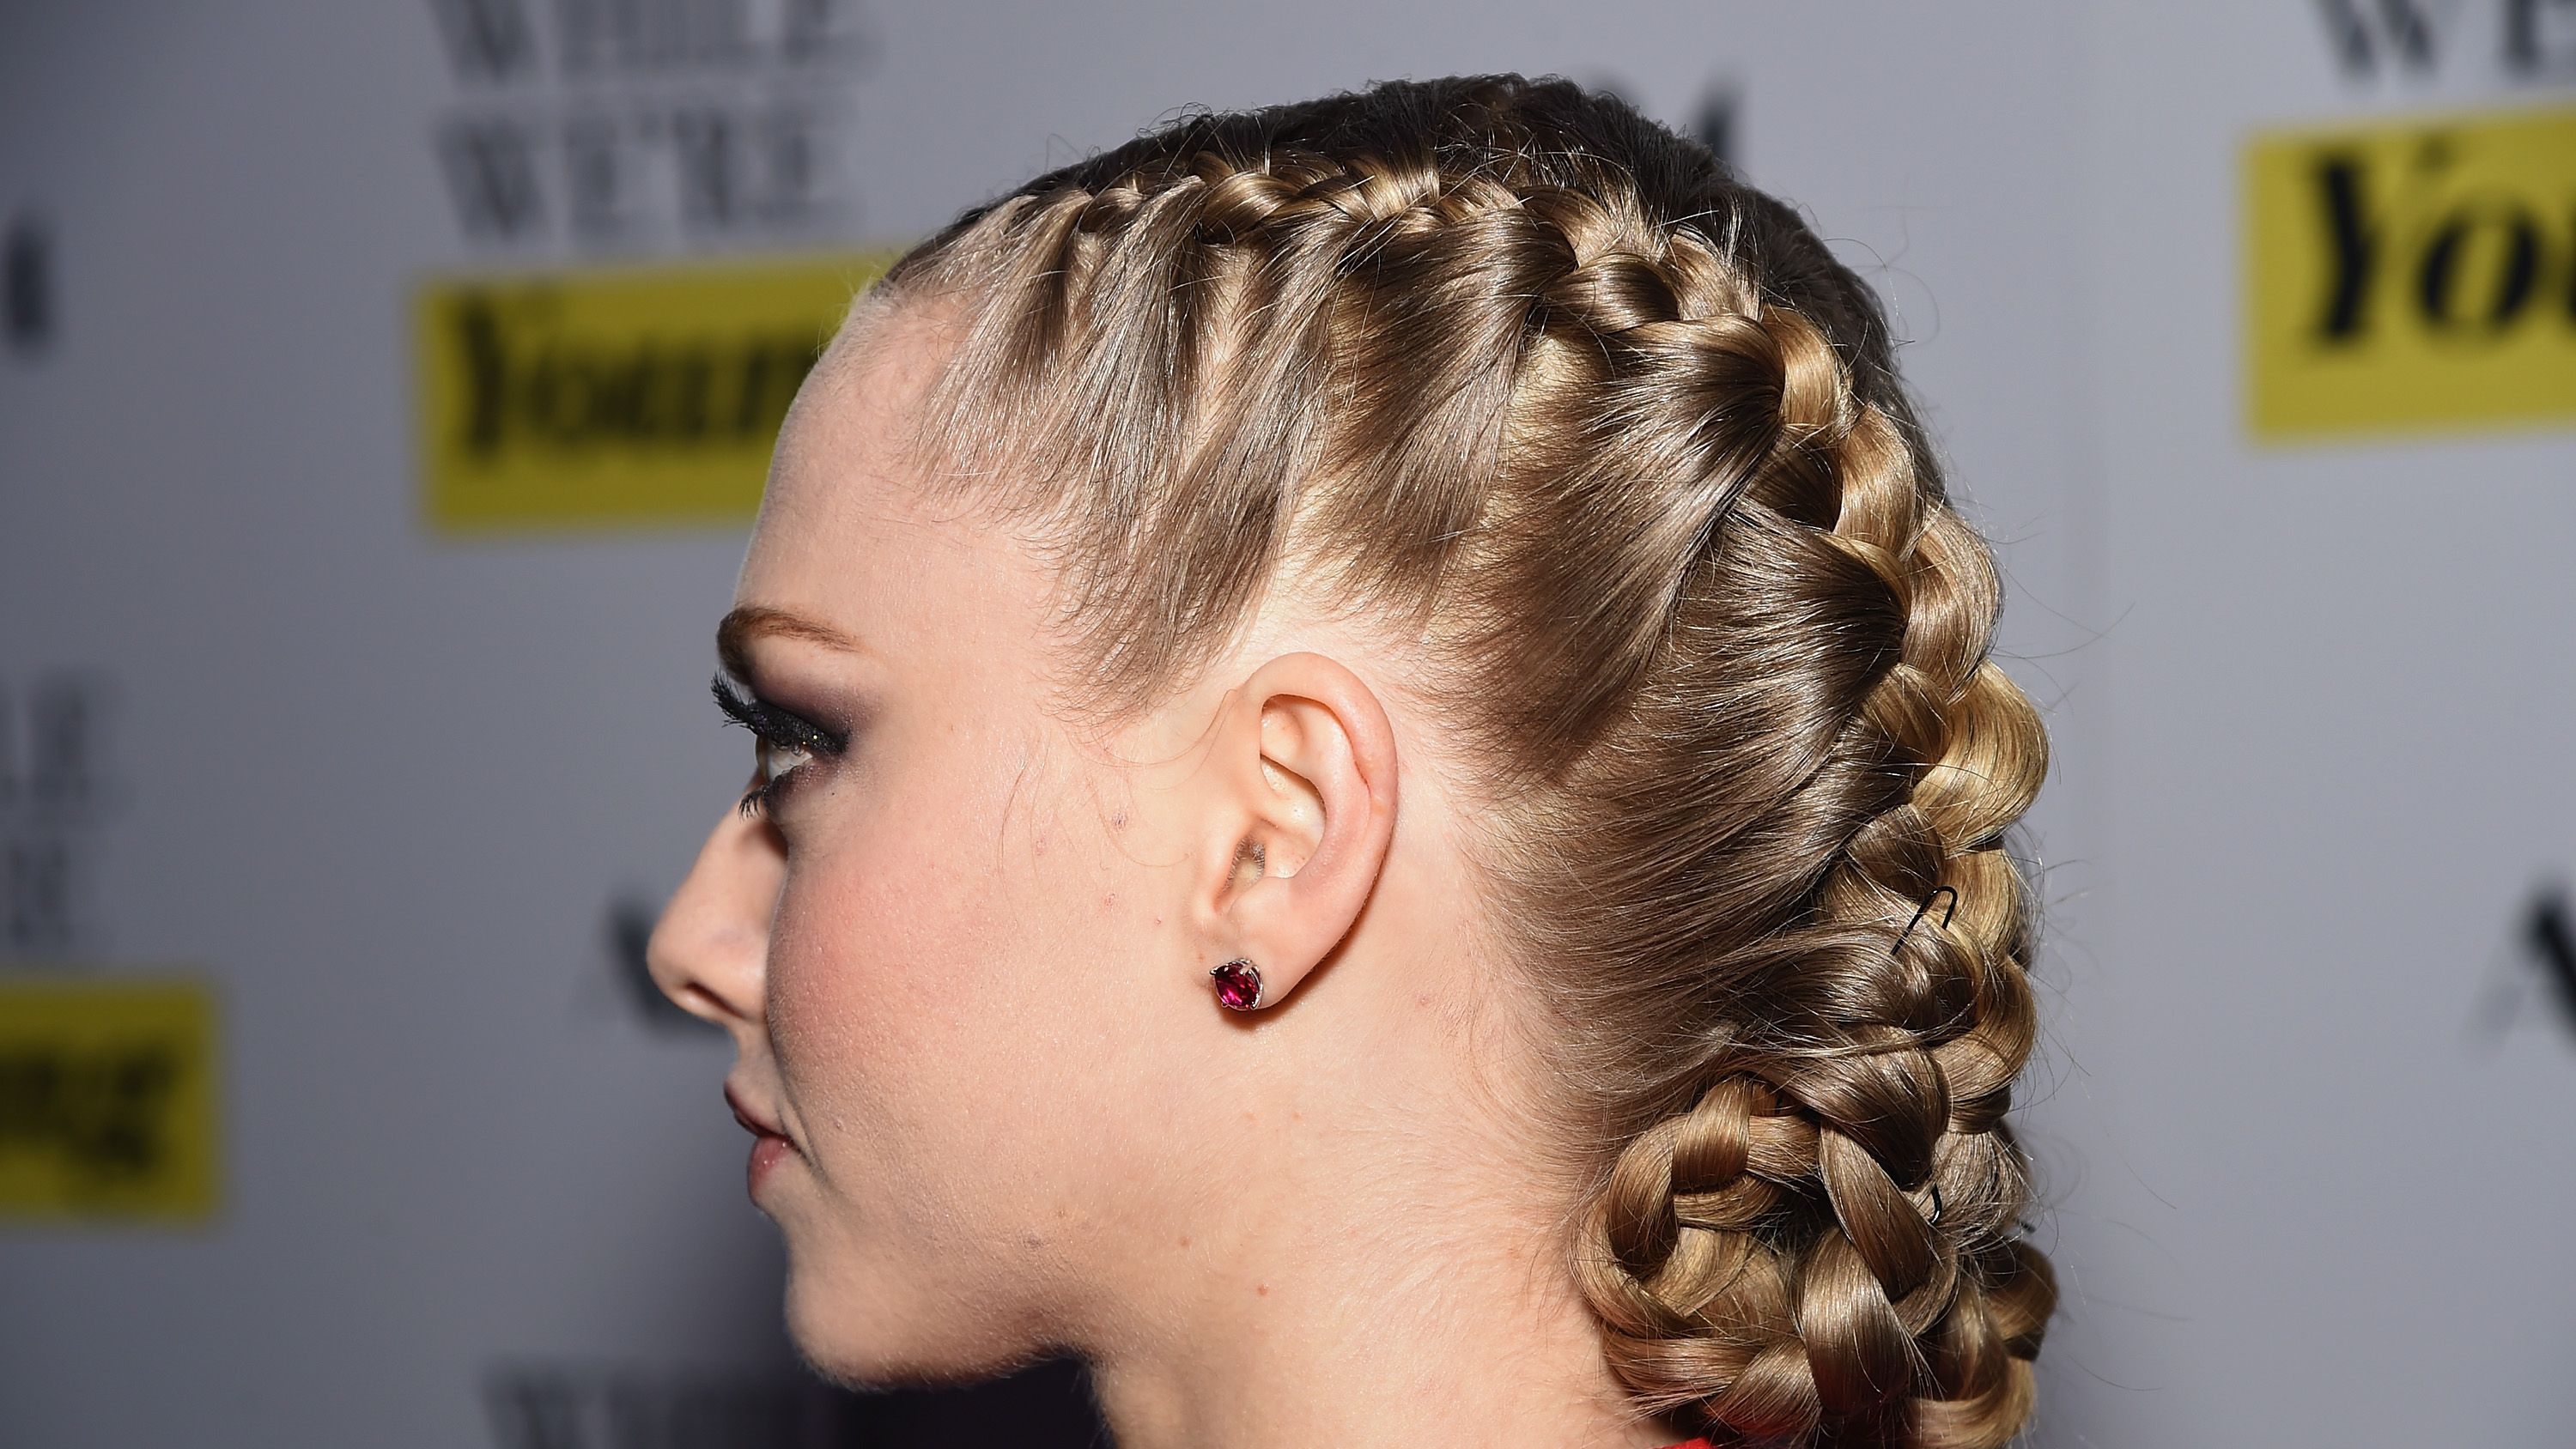 Beauty Meets Edge: 44 Braids with Curls Hairstyles